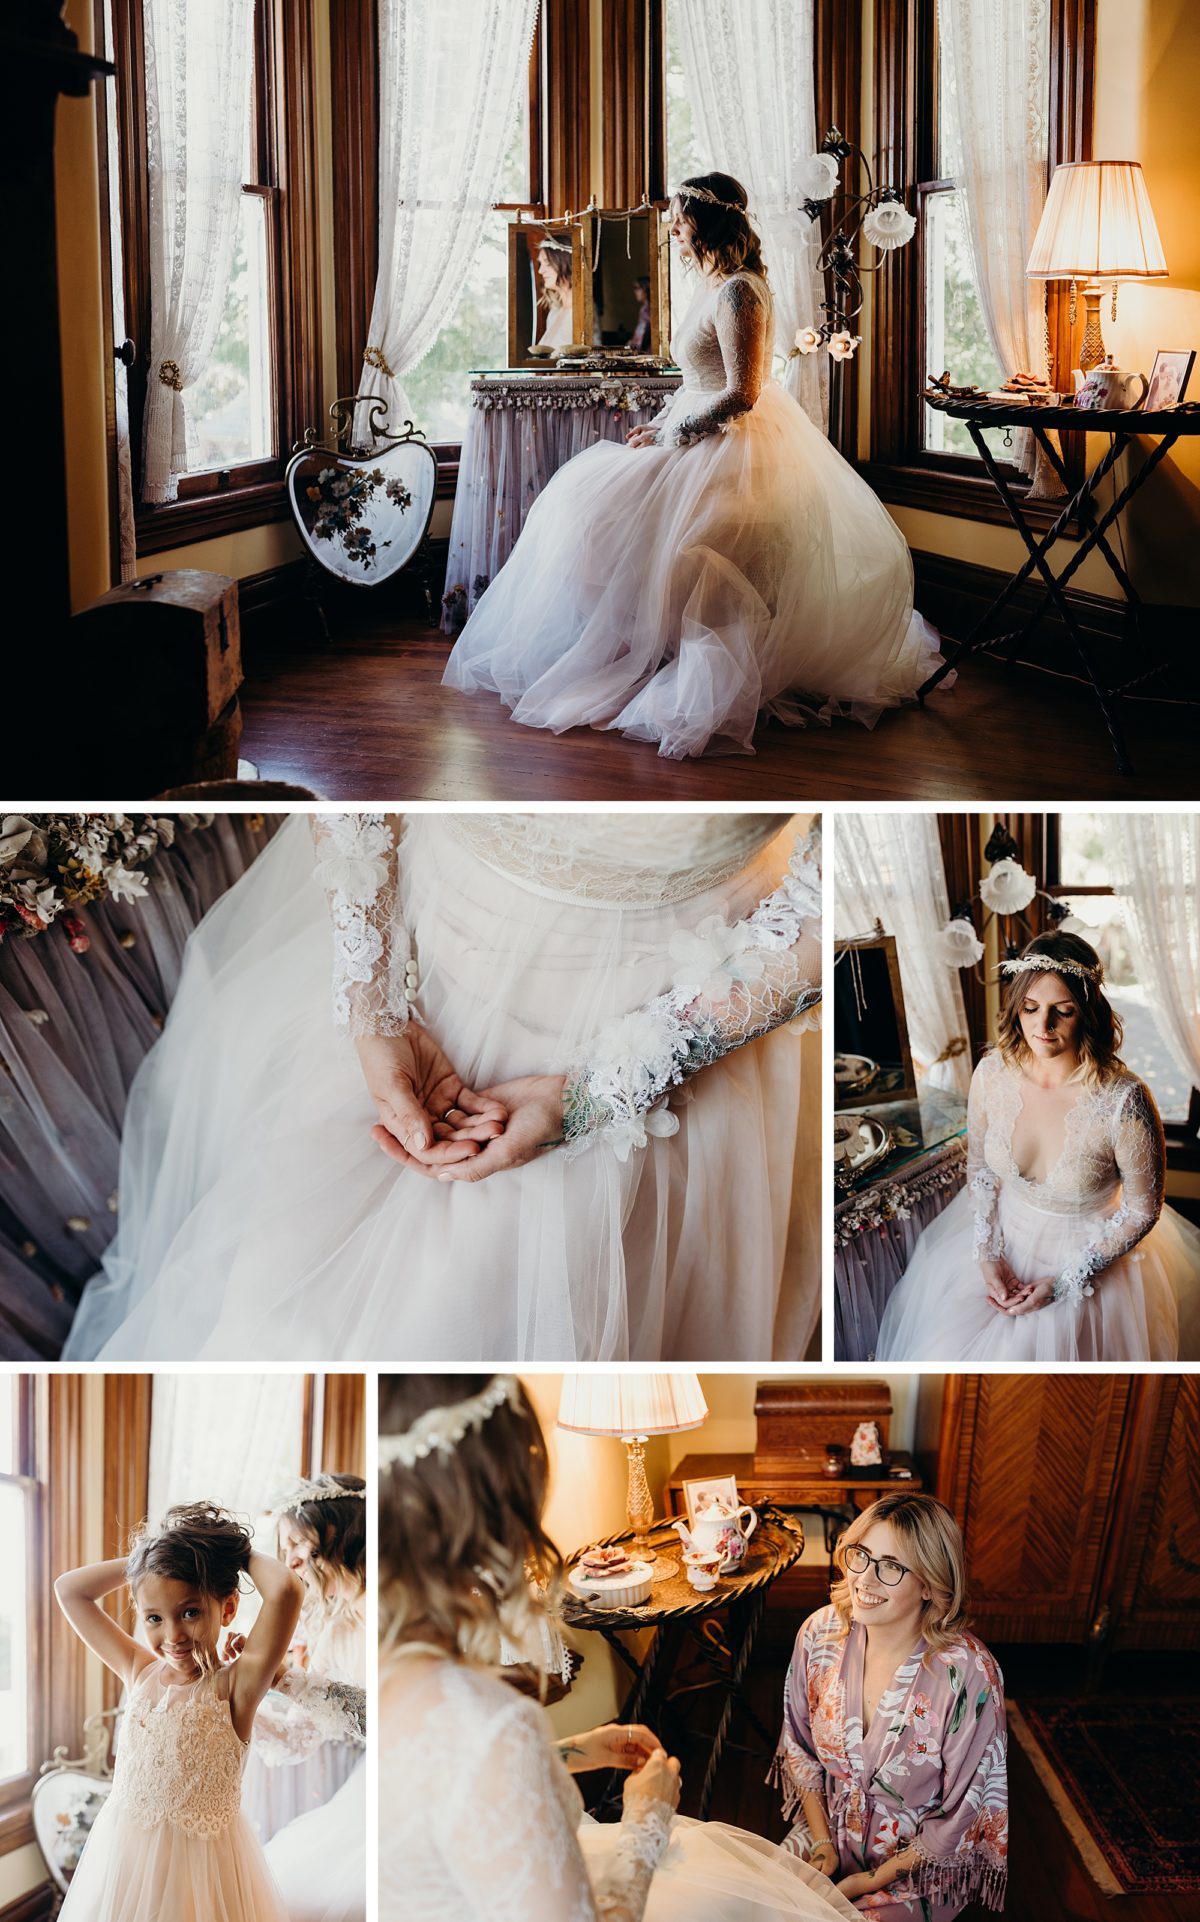 The bride prepares herself for her wedding day at The Victorian Belle in Portland, OR. Photographed by Portland Wedding Photographer, Briana Morrison